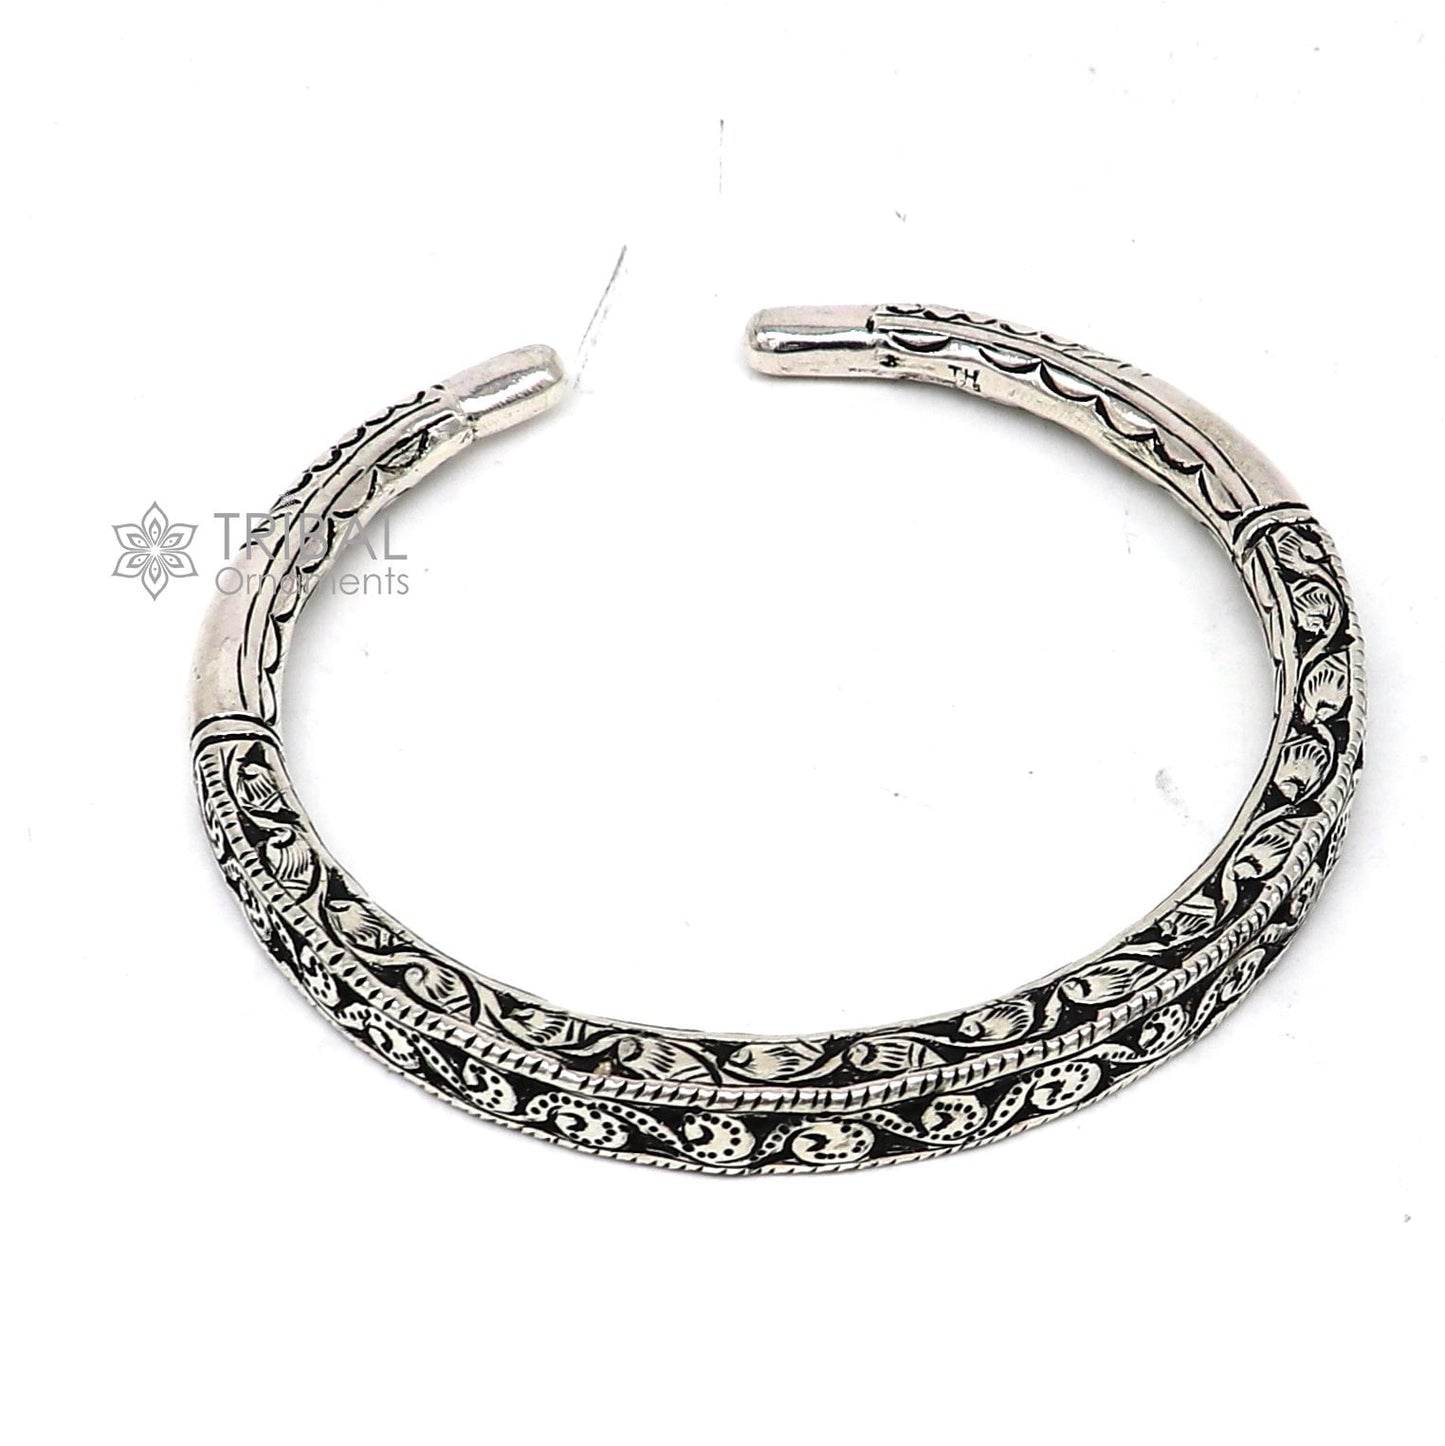 Exclusive trendy stylish 925 sterling silver Vintage design handmade gorgeous foot kada ankle bracelet tribal ethnic silver jewelry nsfk101 - TRIBAL ORNAMENTS